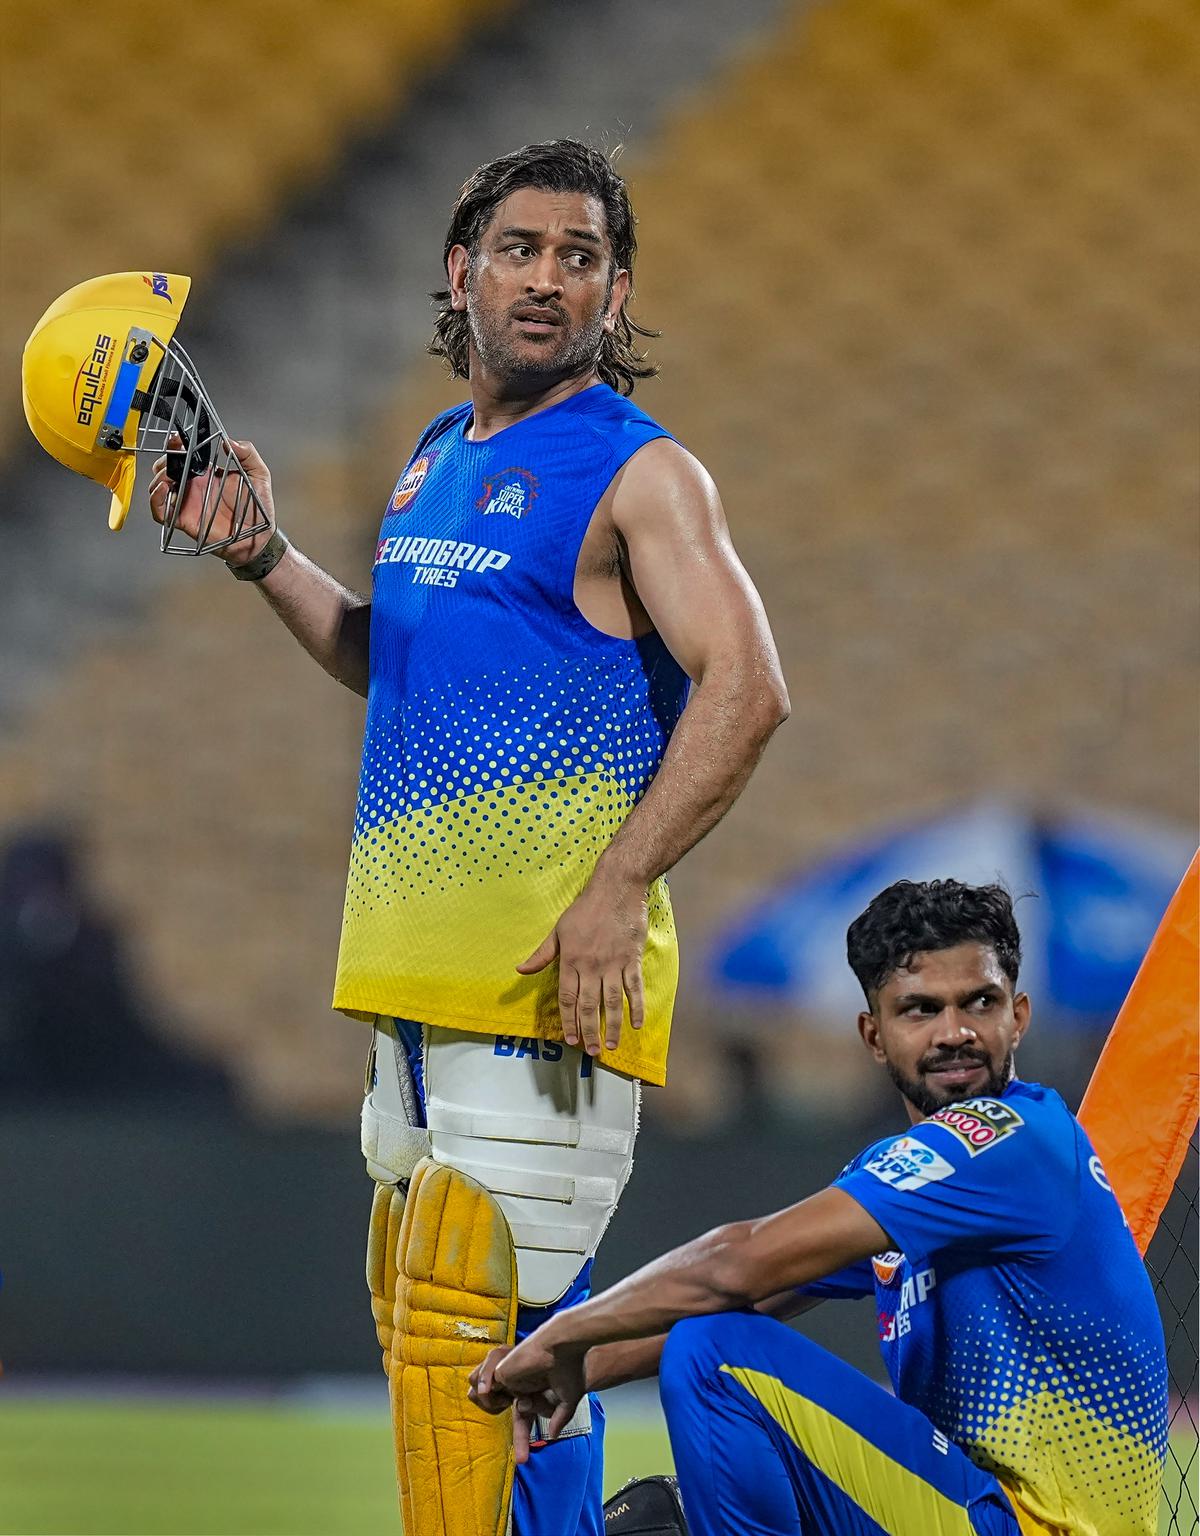 Gaikwad with Dhoni during a training session ahead of the match between Chennai Super Kings and Royal Challengers Bengaluru, at MA Chidambaram Stadium, in Chennai.